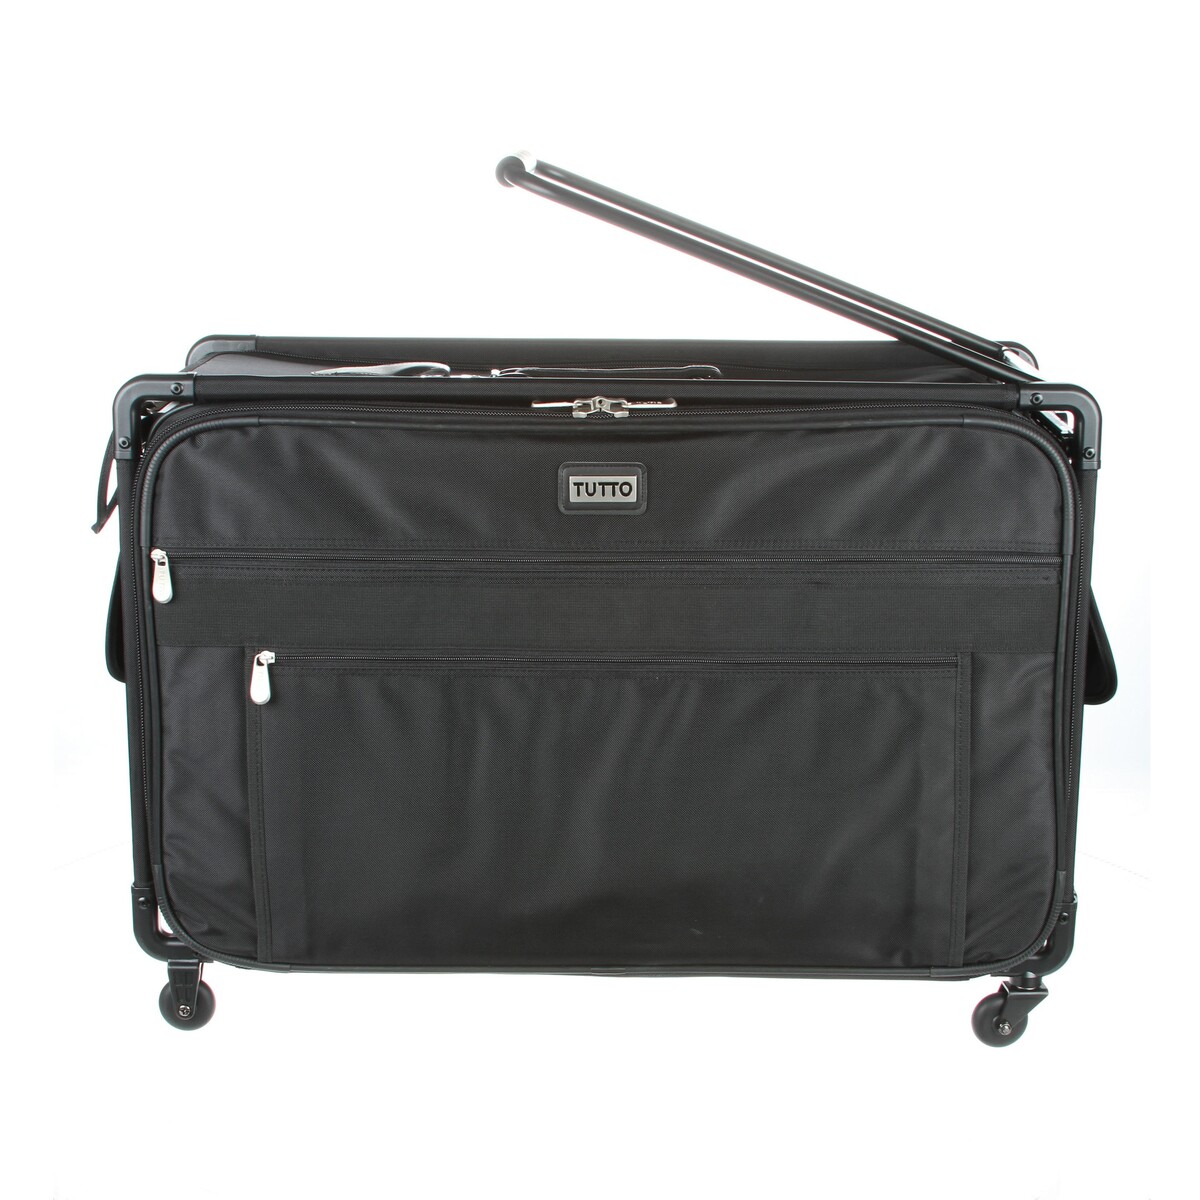 Tutto Official Site -Healthy Luggage, Sewing & Serger Machine Cases & More